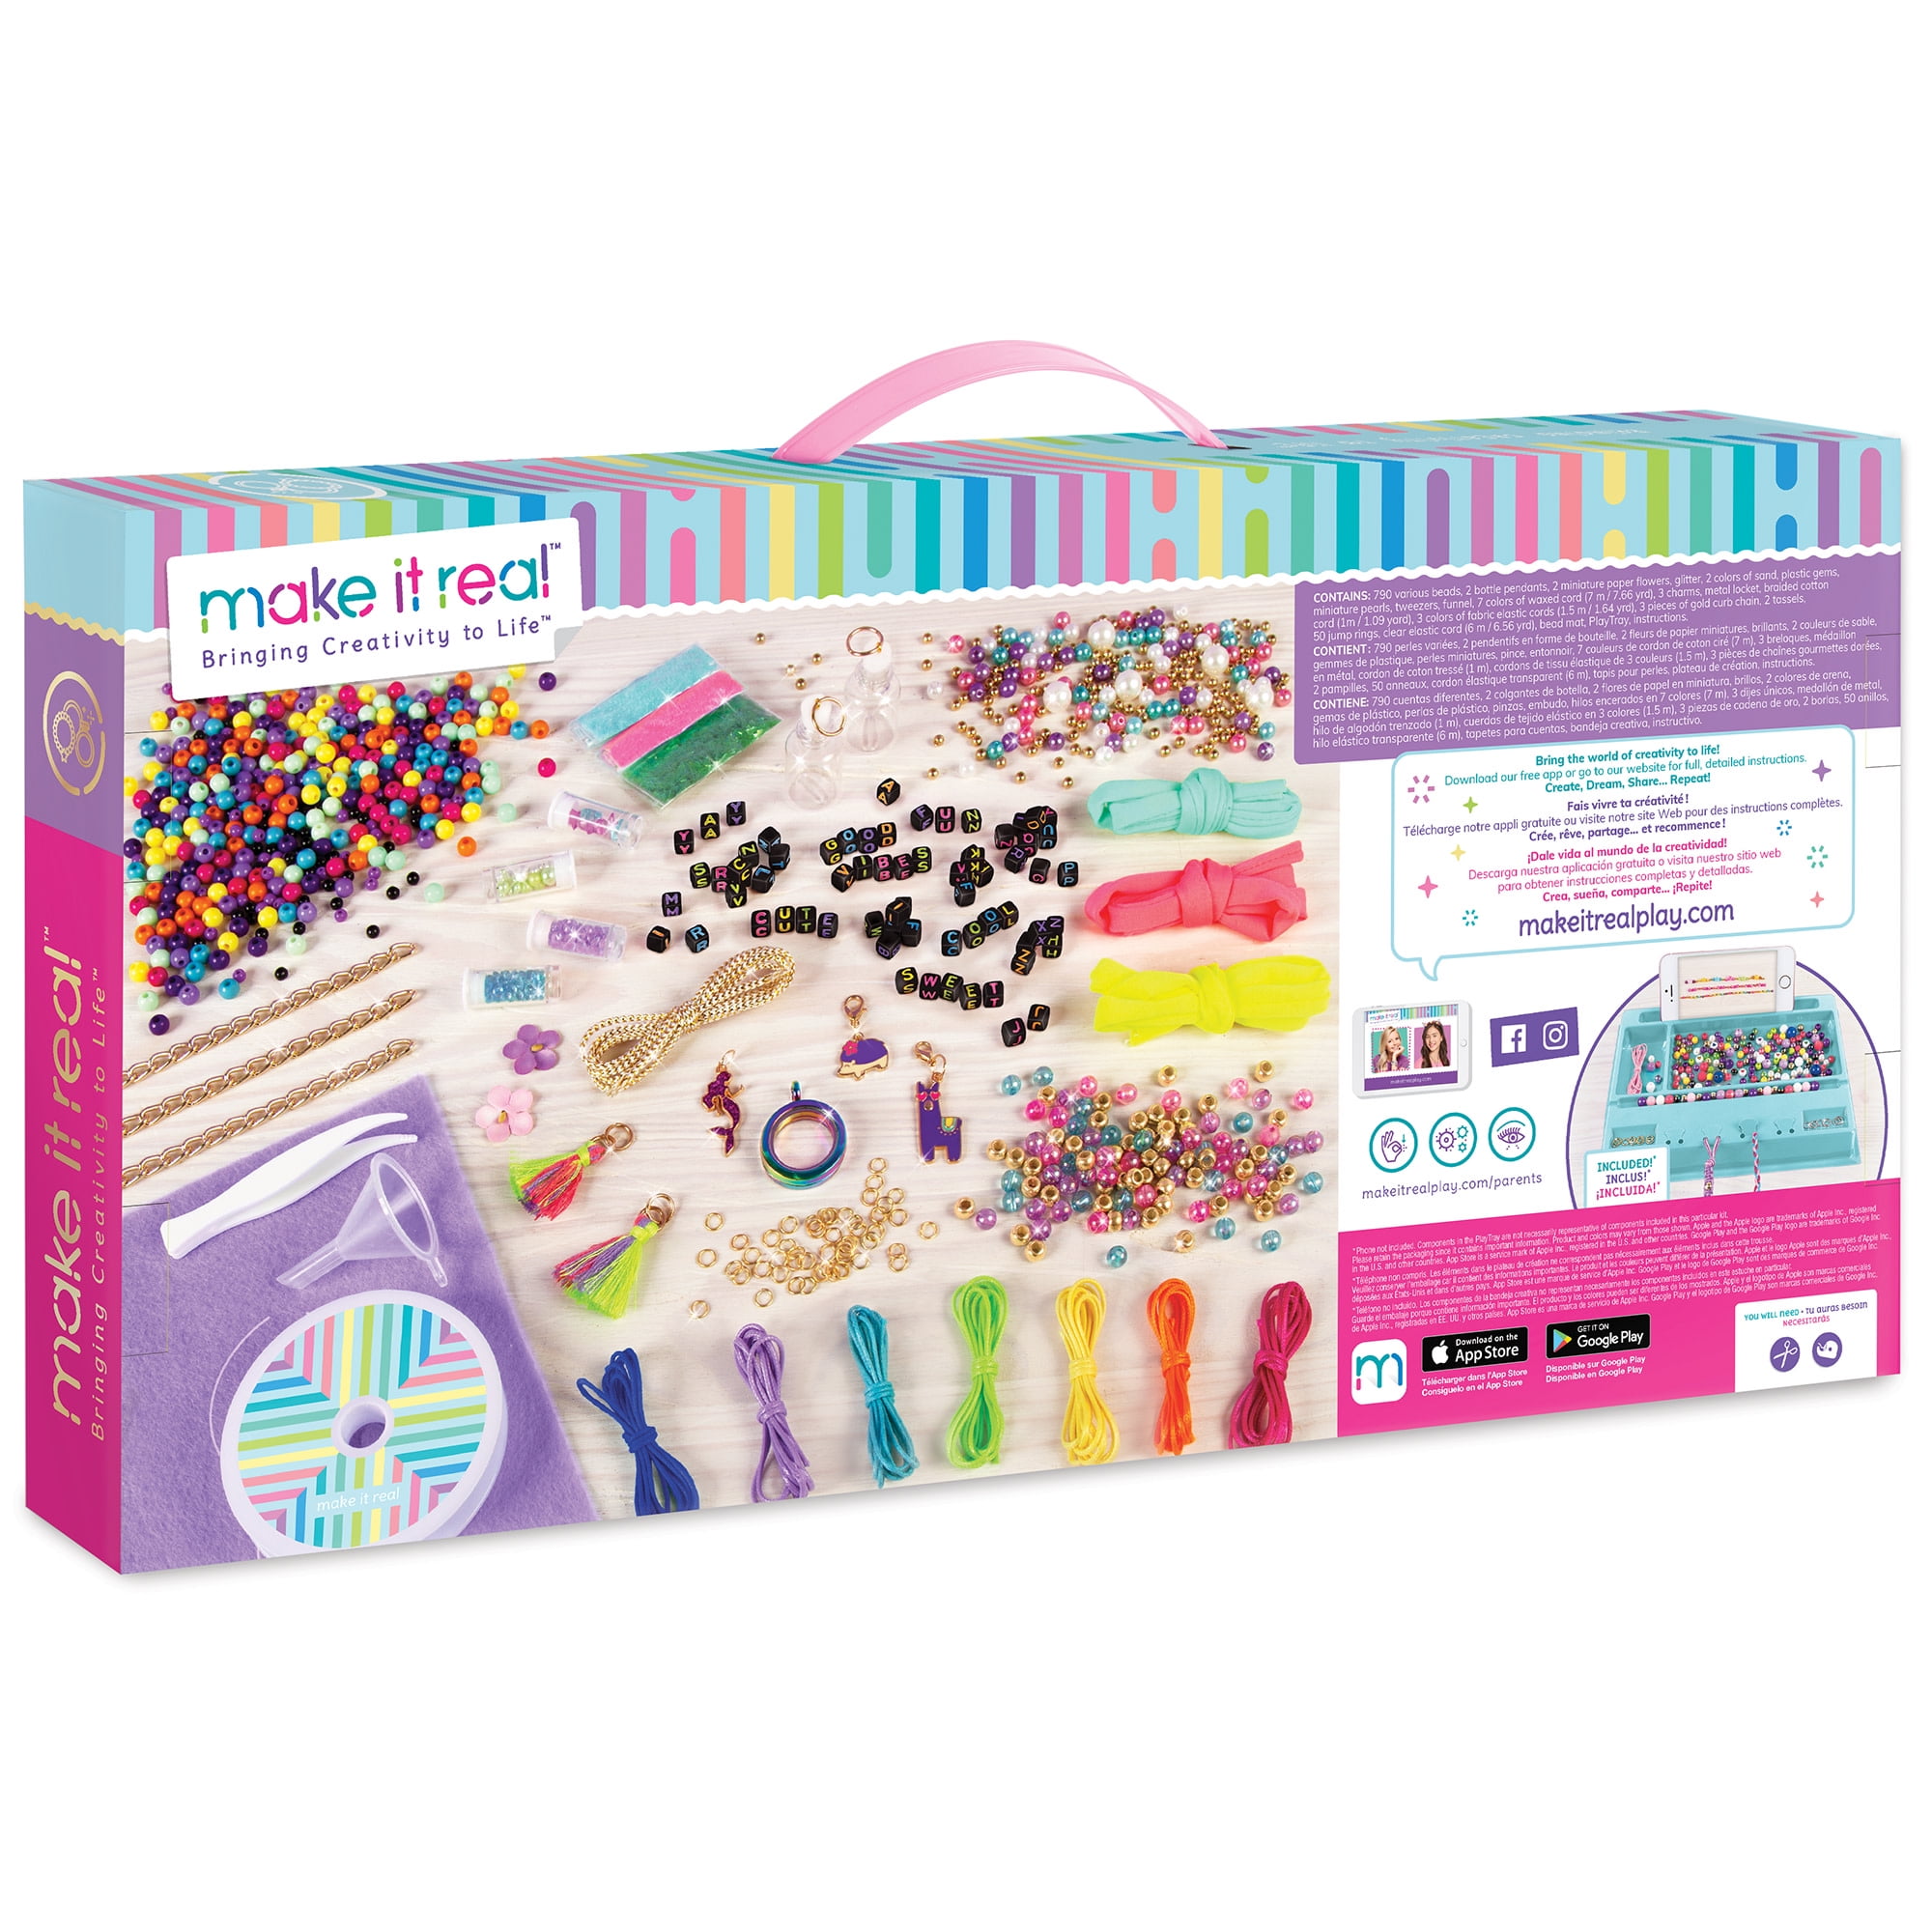 Make It Real: Mega DIY Jewelry Studio Kit - Create 50 Pieces Of Jewelry,  850 Pieces, Make Unique Charm & Bead Jewelry, Includes Play Tray, Tweens &  Girls, Arts & Crafts, Ages 8+ 